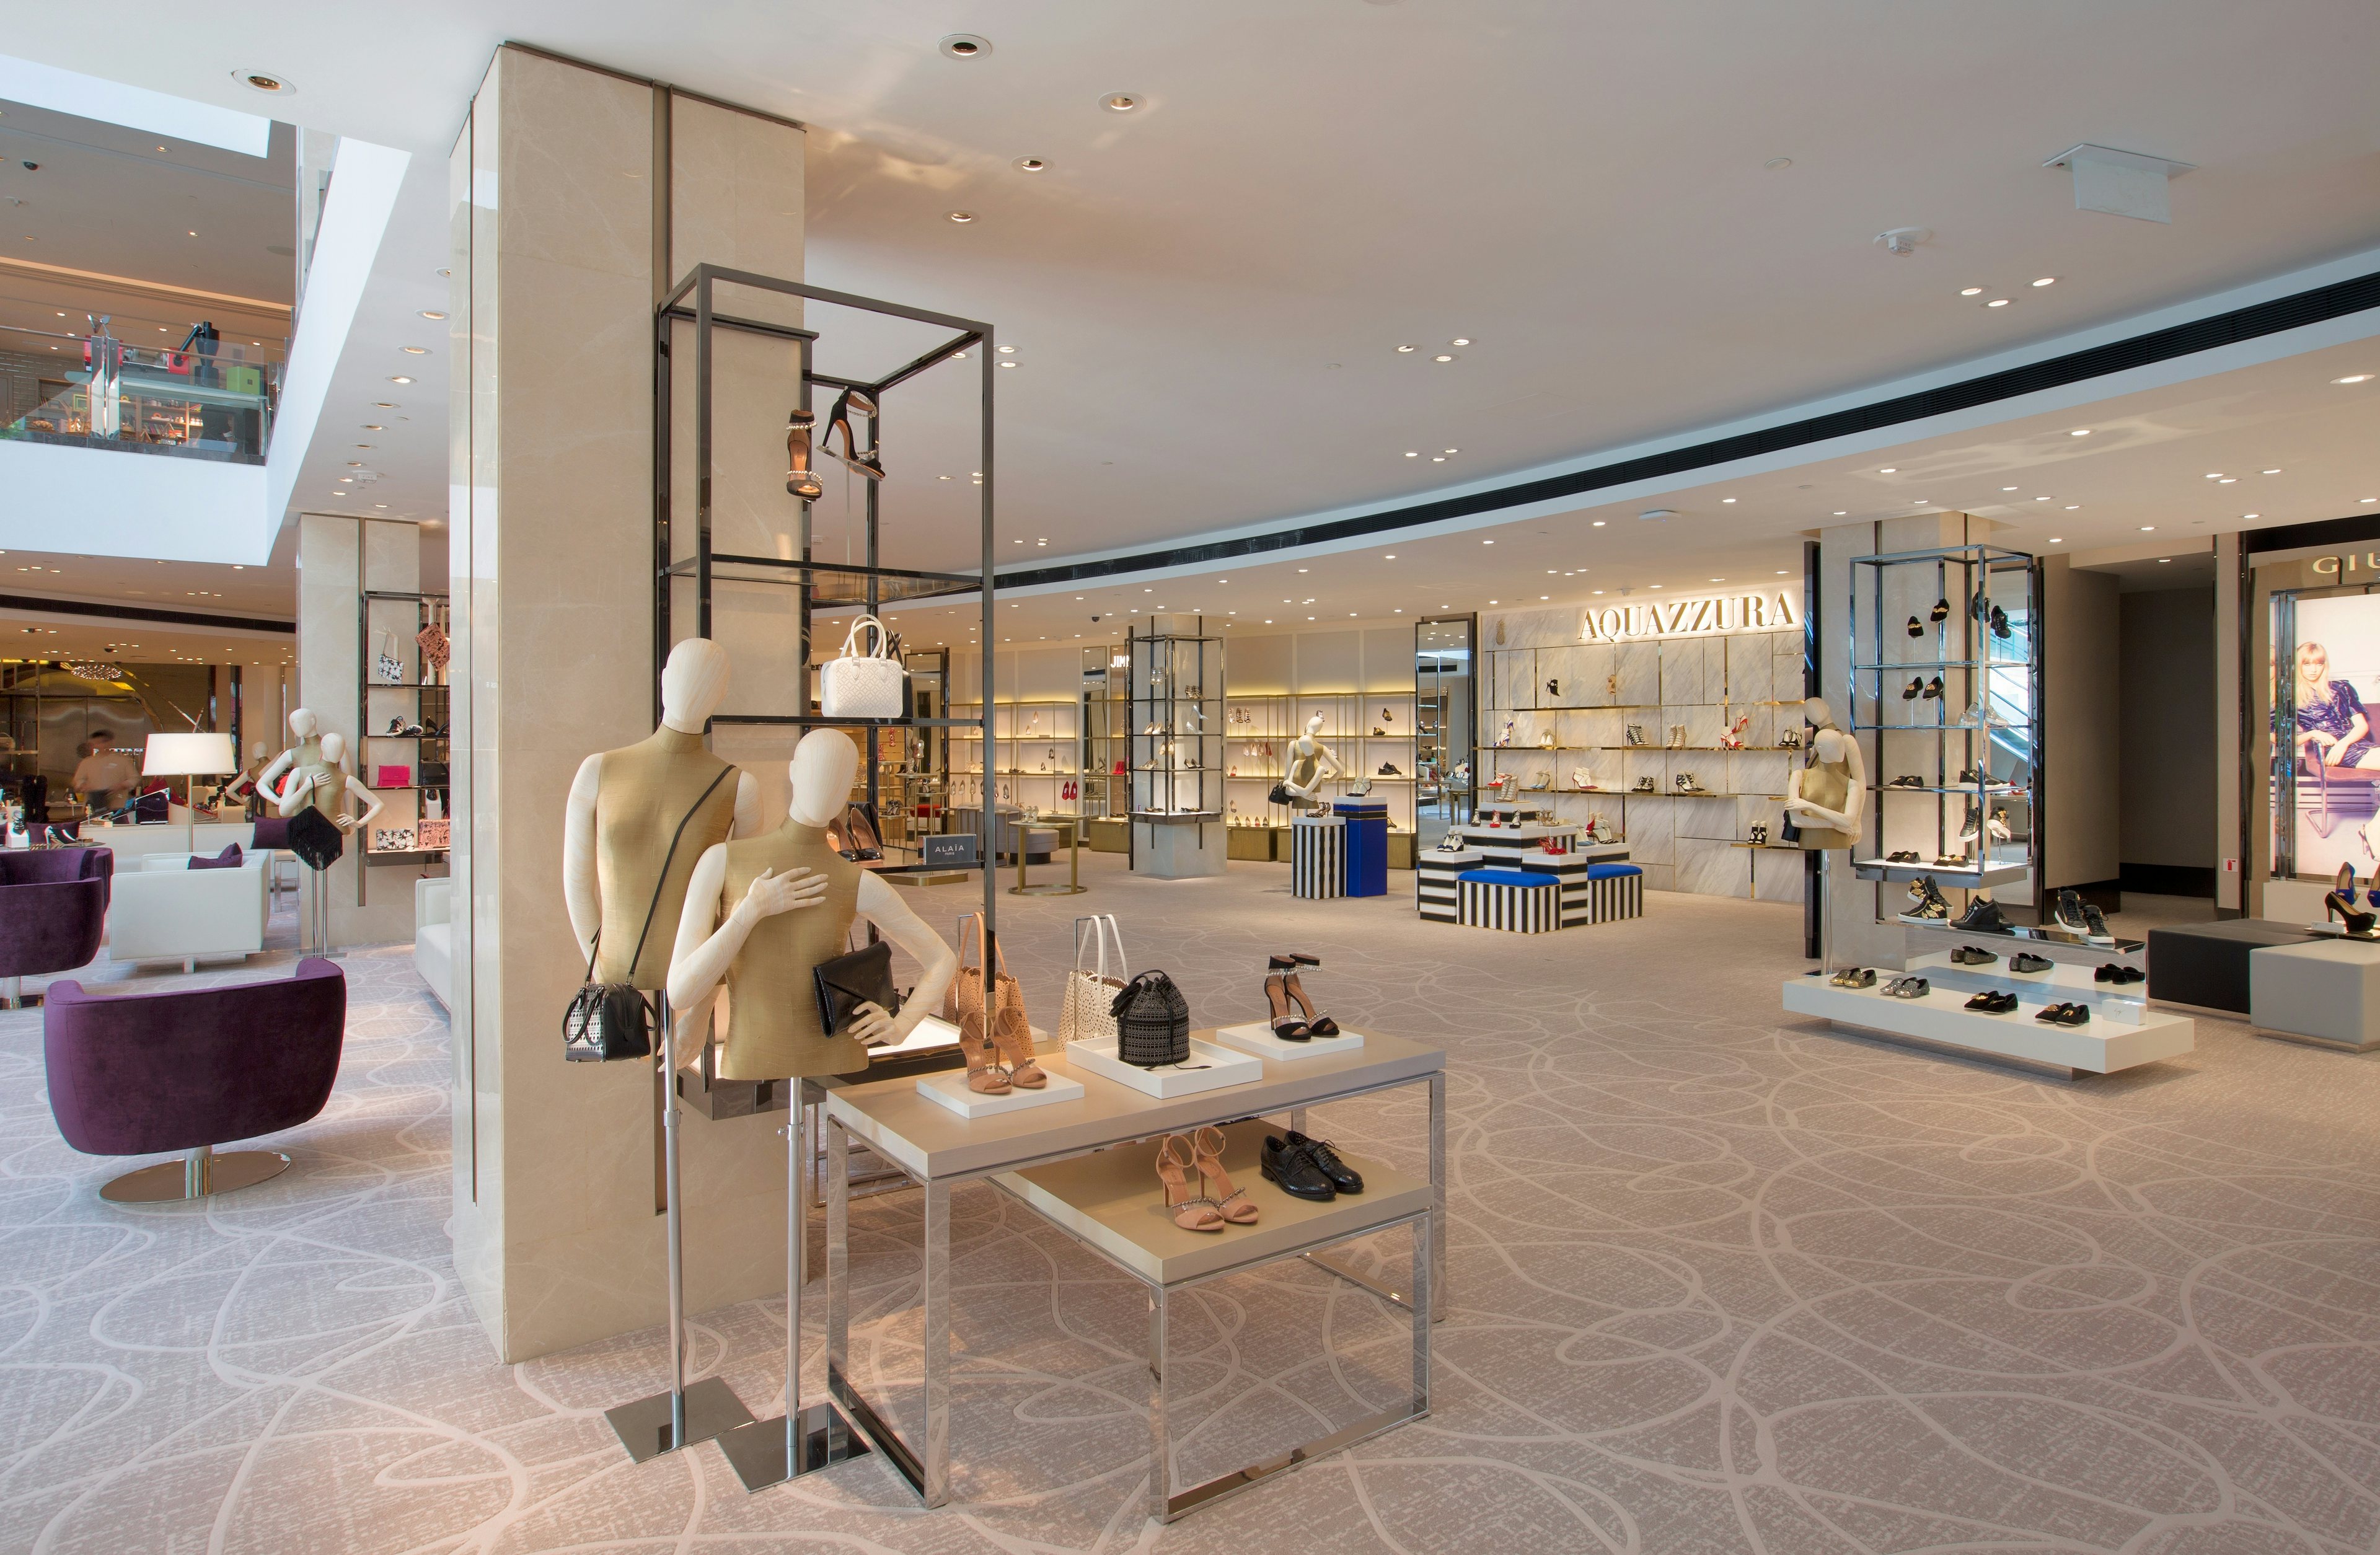 T Galleria by DFS now features a two-floor shoe salon with more than 50 local and international brands. (Courtesy Photo)